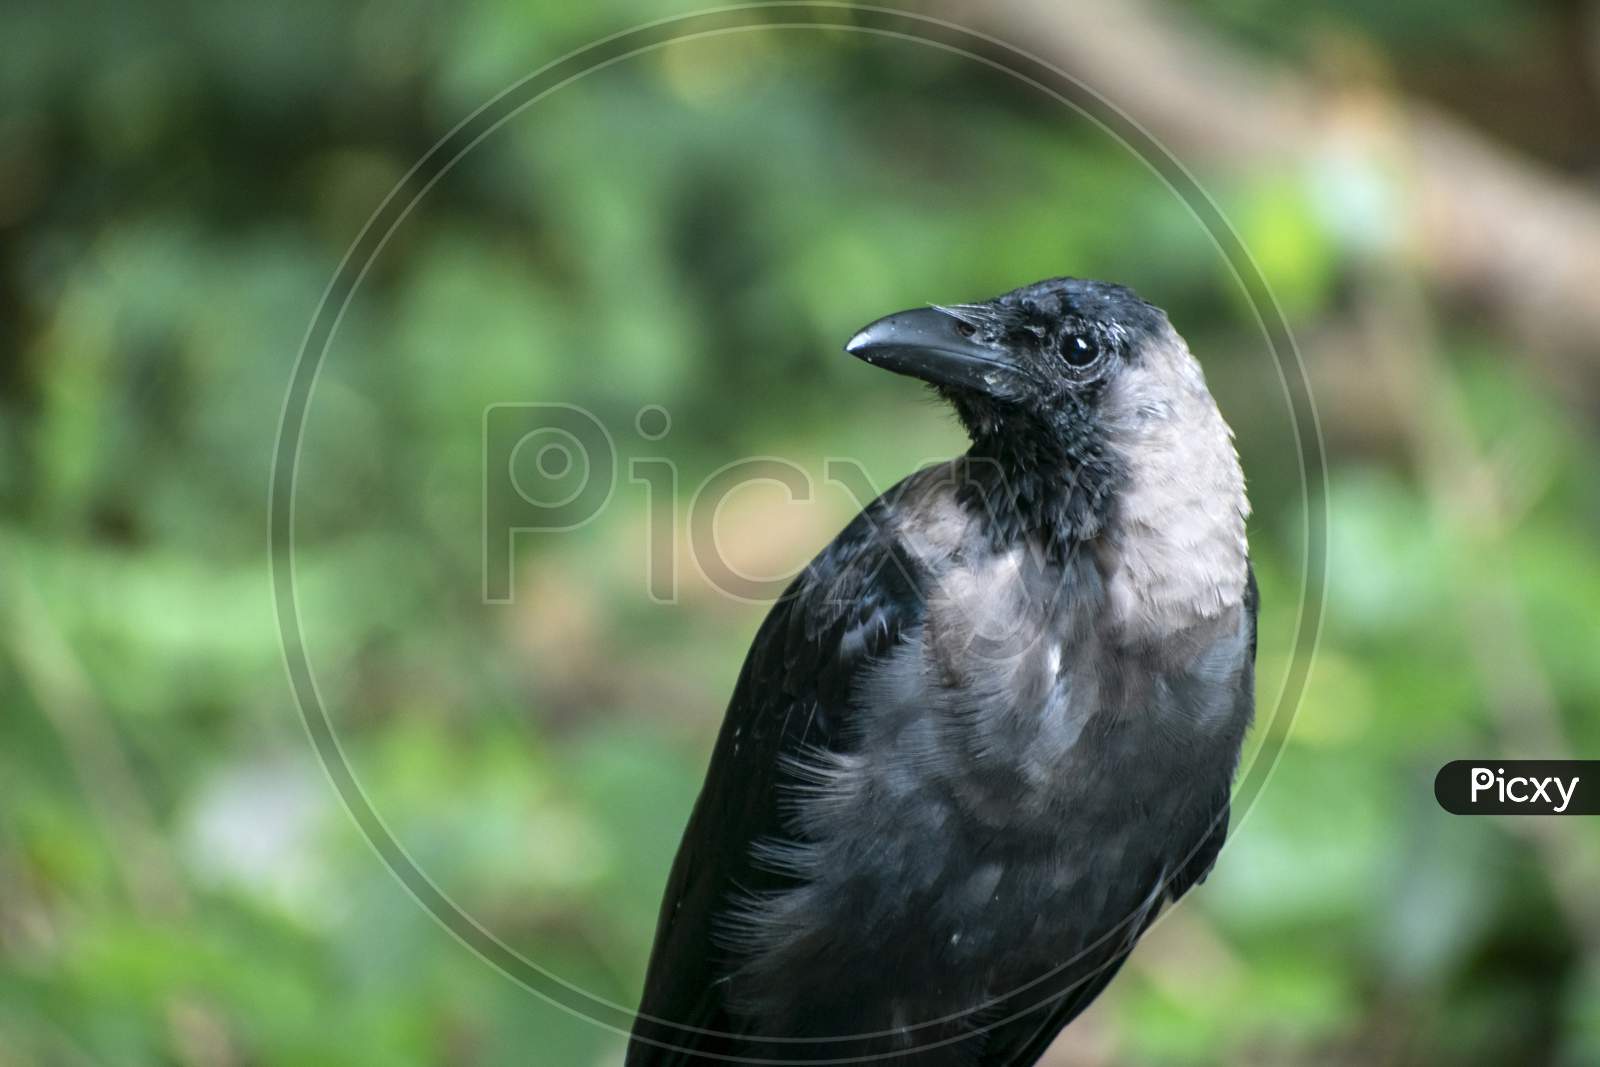 Close-Up Portrait Of A Raven Bird Isolated On Blurred Background. Young Carrion Crow, Corvus Corone Against A Blurred Background